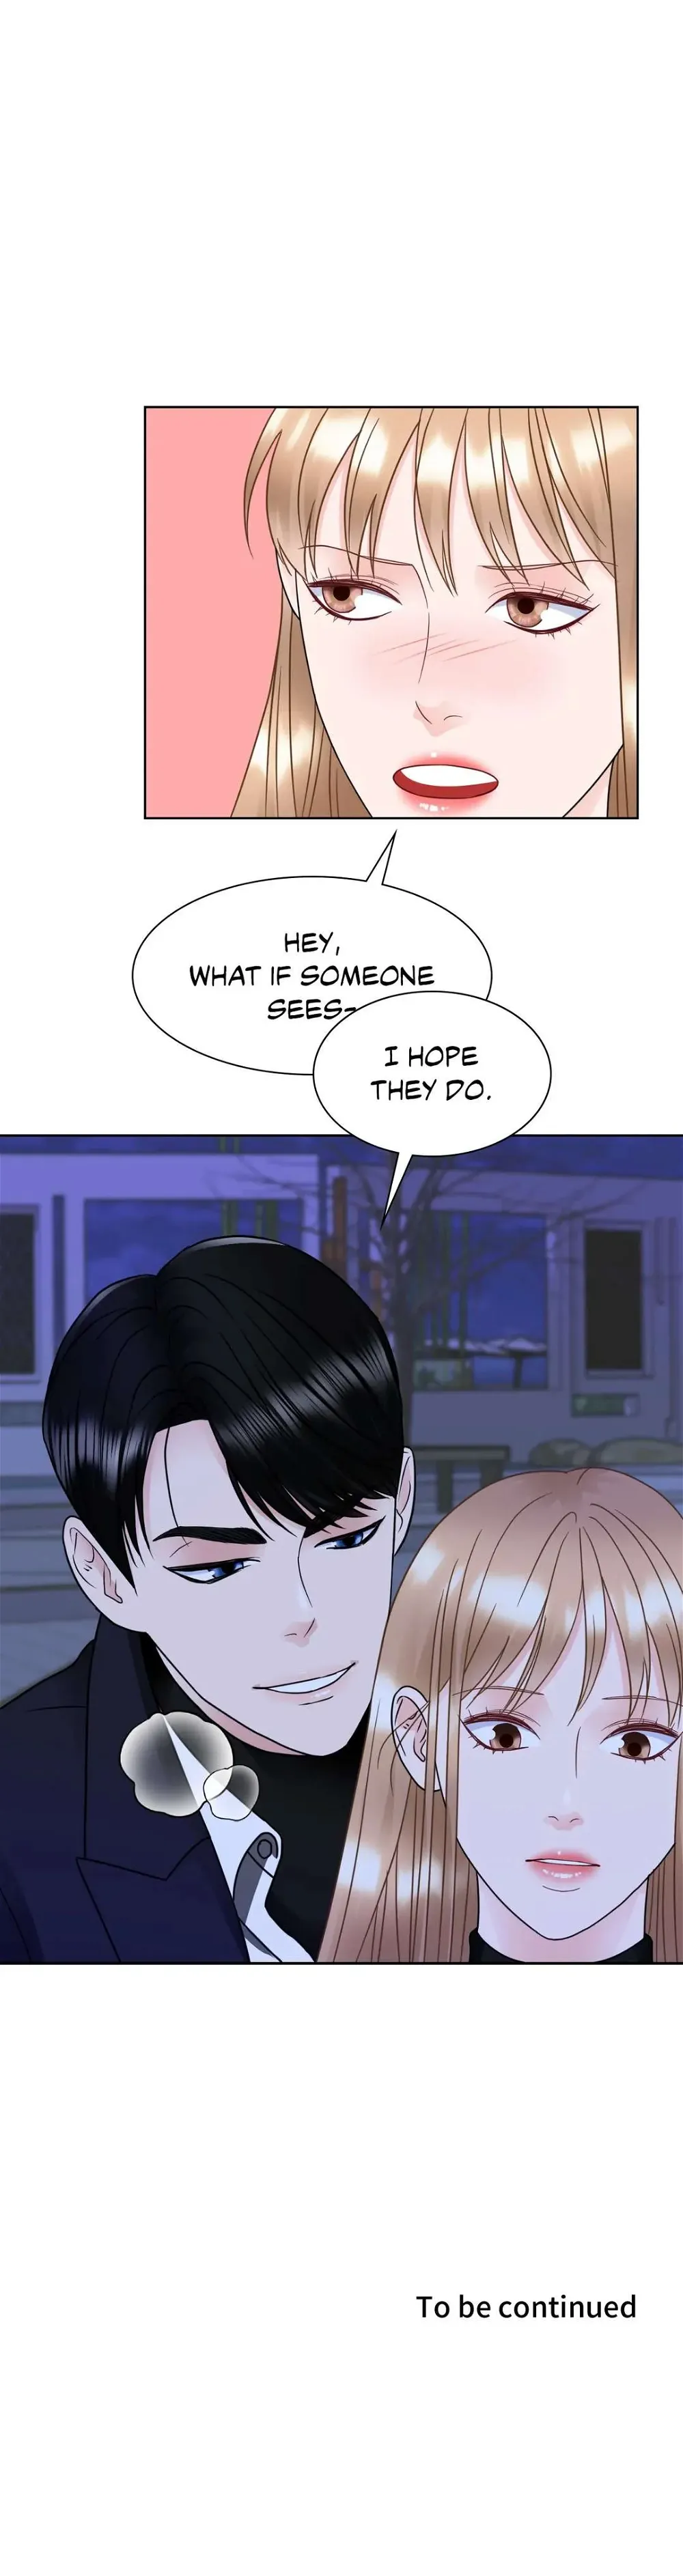 Long Lasting Love chapter 17 - Page 43